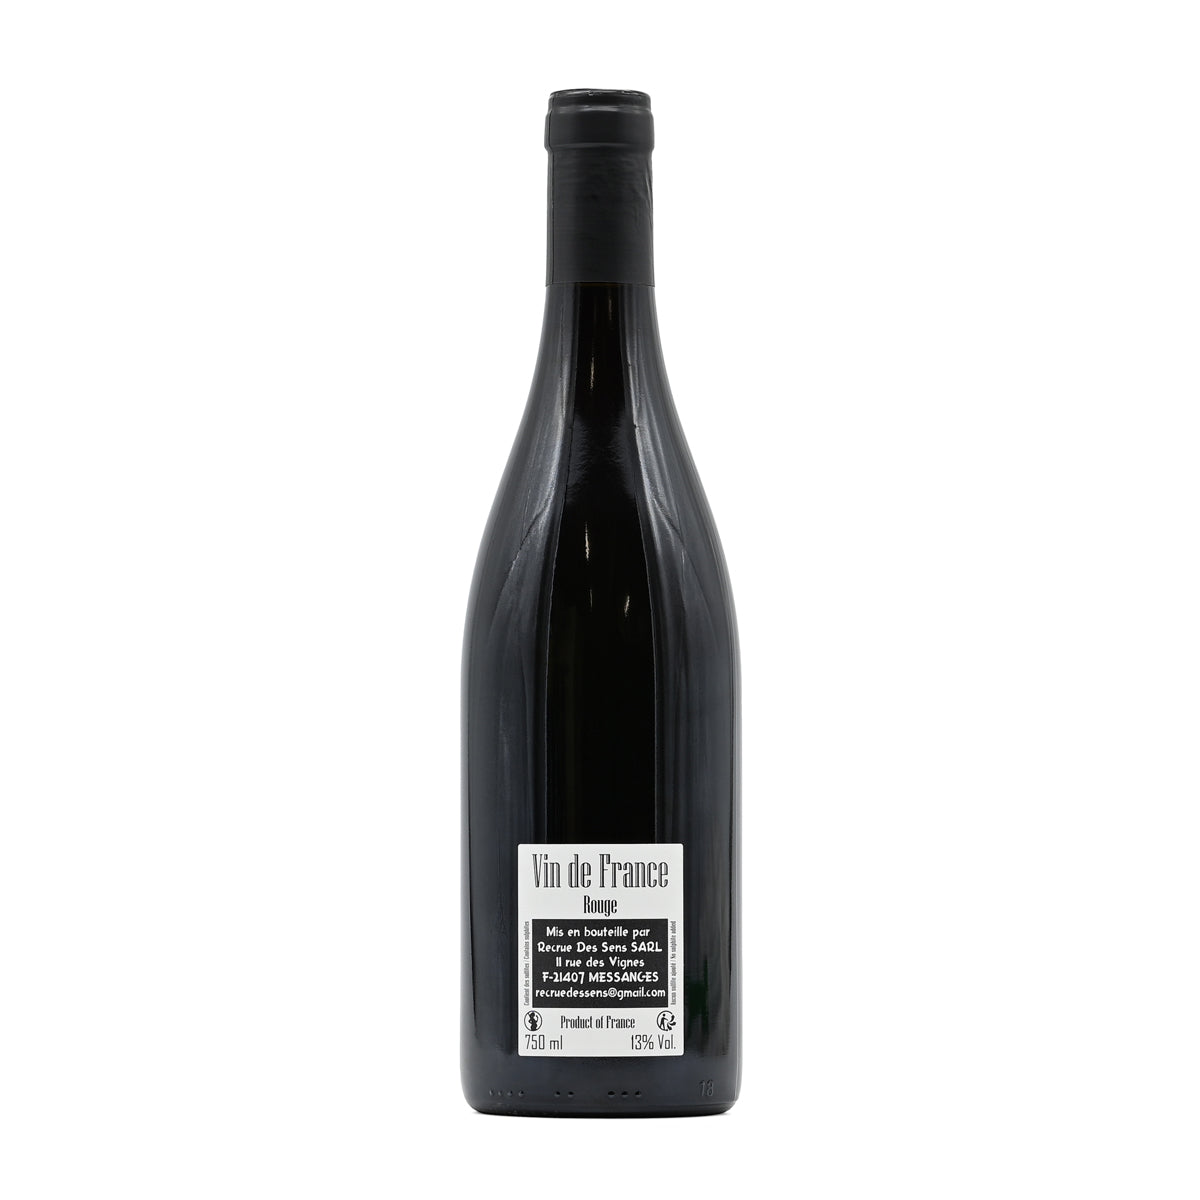 Yann Durieux GC Rouge 2019, 750ml French red wine, made from Pinot Noir; Vin de France, from Recrue Des Sens, Burgundy, France – GDV Fine Wines, Hong Kong